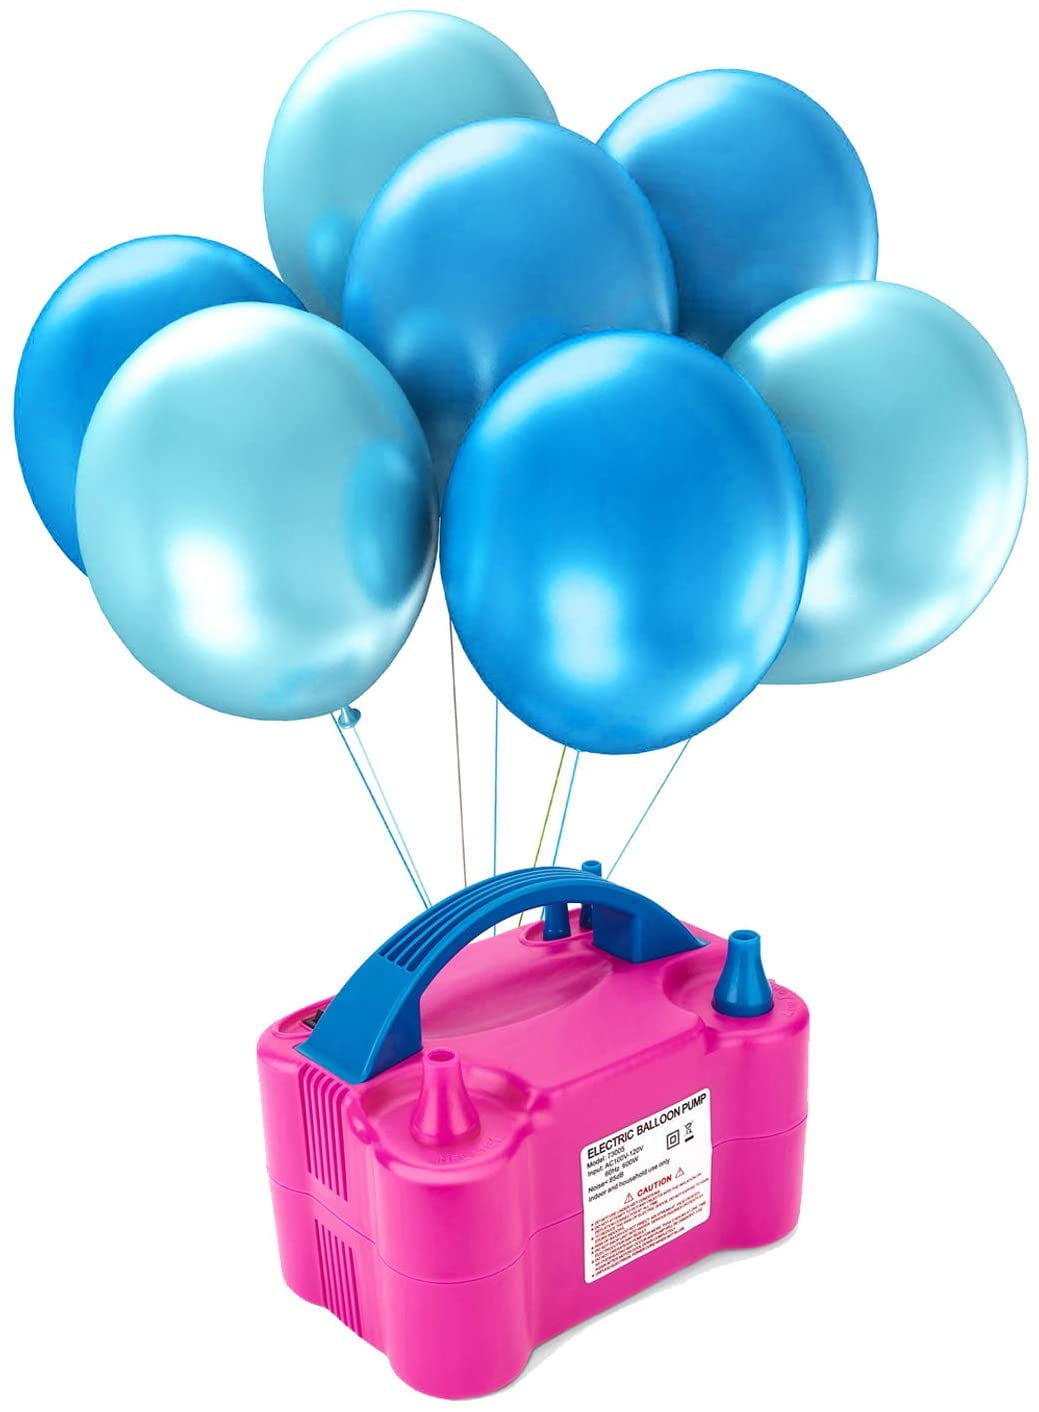  Electric Balloon Pump,QIPUMP 110V 600W Balloon Blower Inflator  Dual Nozzle Air Pump Balloons Inflator for Decoration, Party, Sport,Gifts:2  Balloon Tying Tools,Blue : Sports & Outdoors